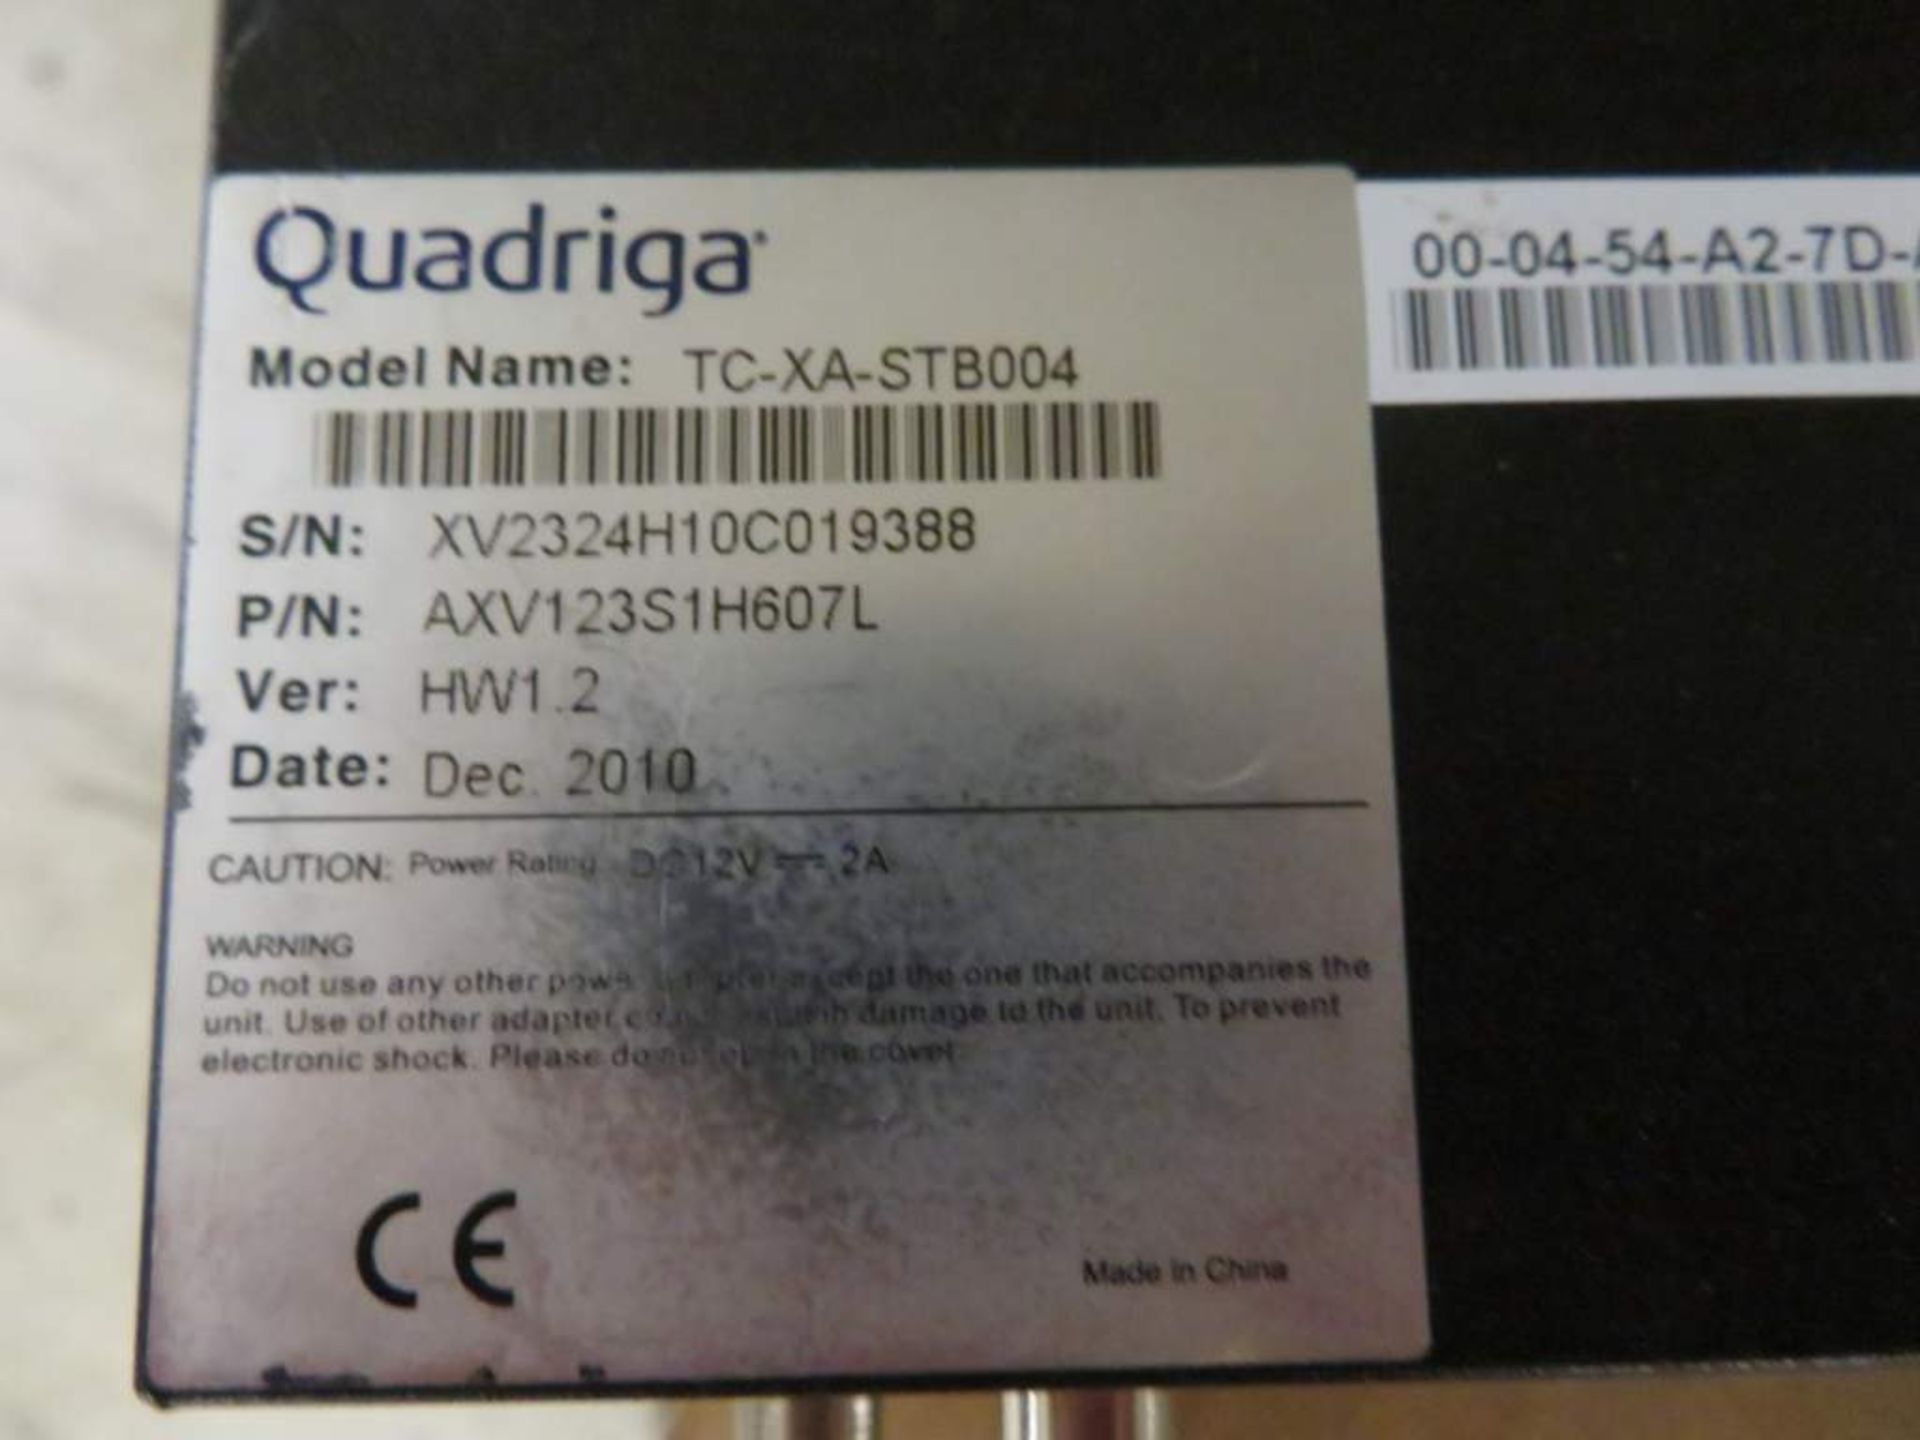 Quadriga TC-XA-STB004 Internet TV Boxes - 3 boxes - Unknown quantity loose in boxes - Image 2 of 5